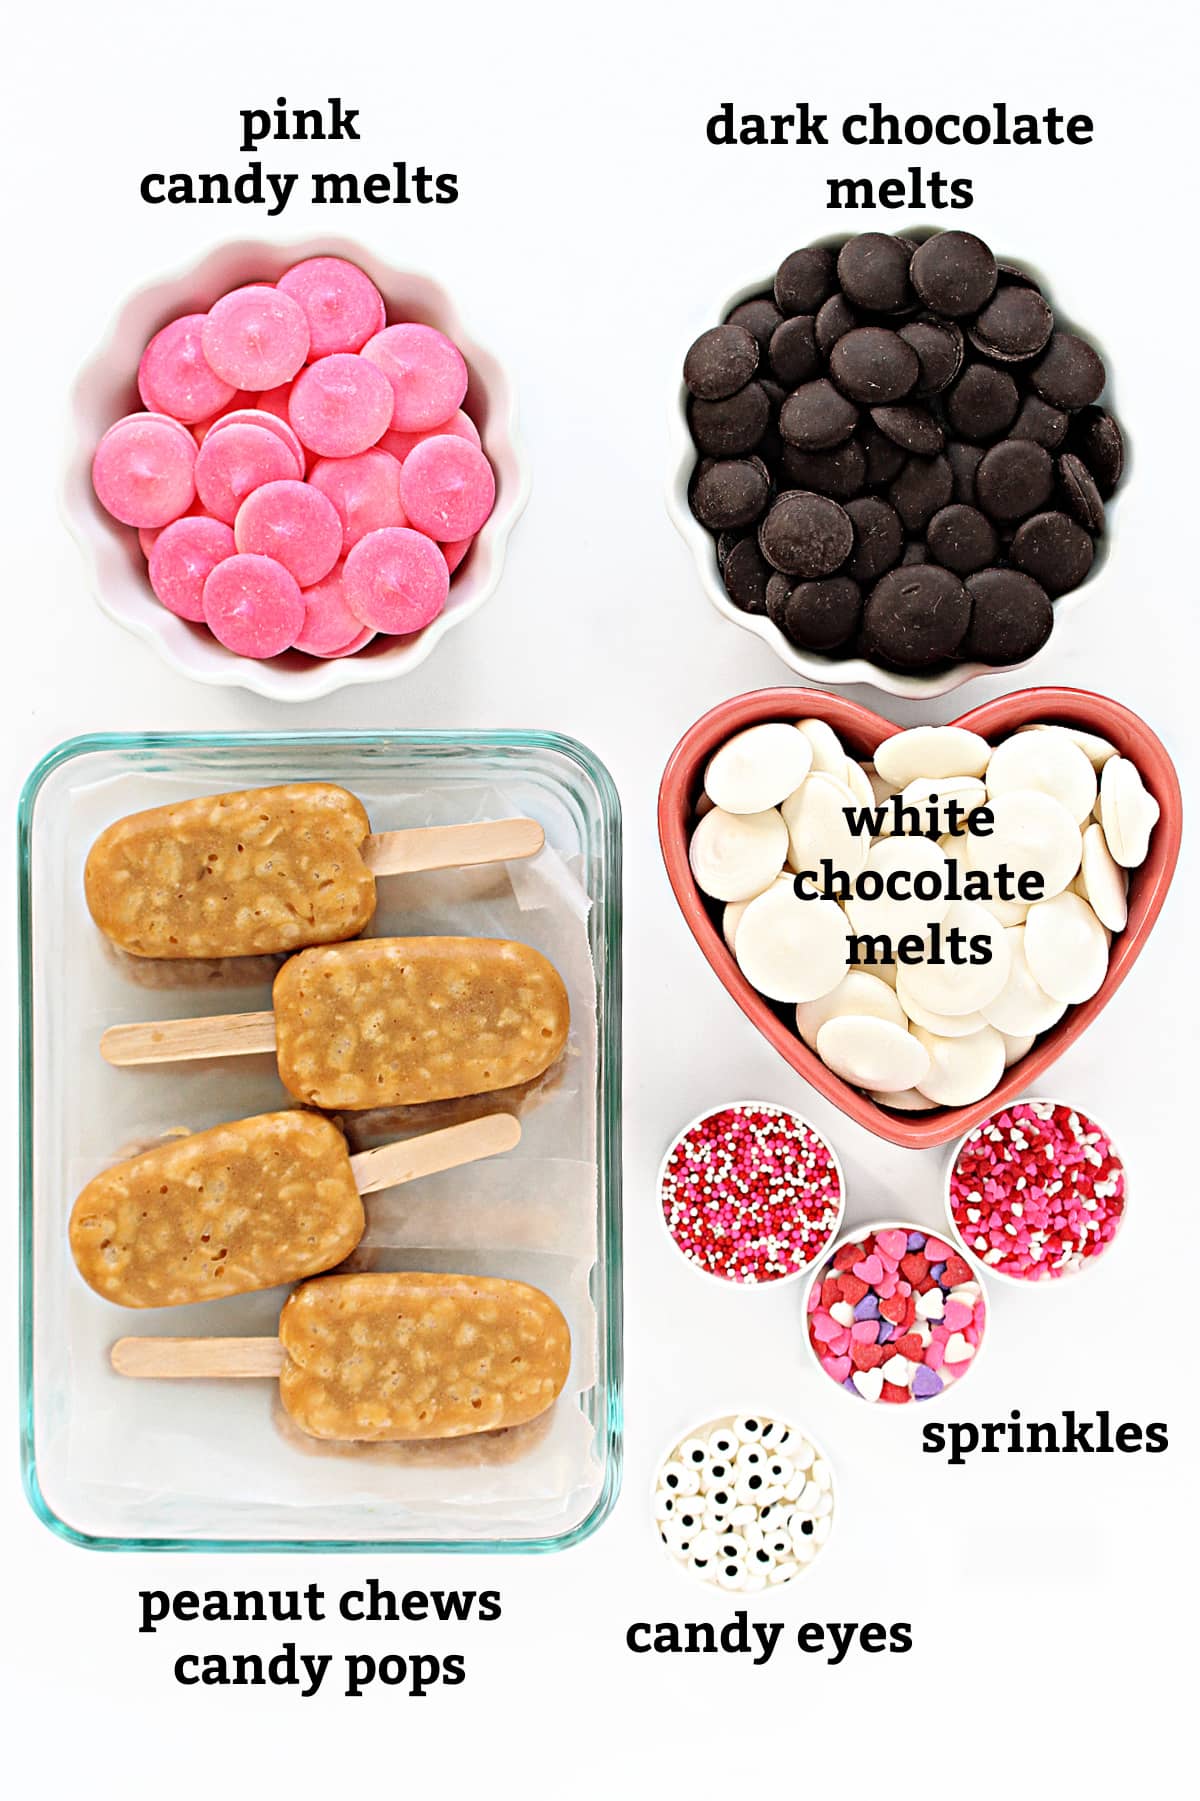 Ingredients: peanut chews pops, pink, dark chocolate, and white chocolate melts, heart sprinkles, candy eyes.